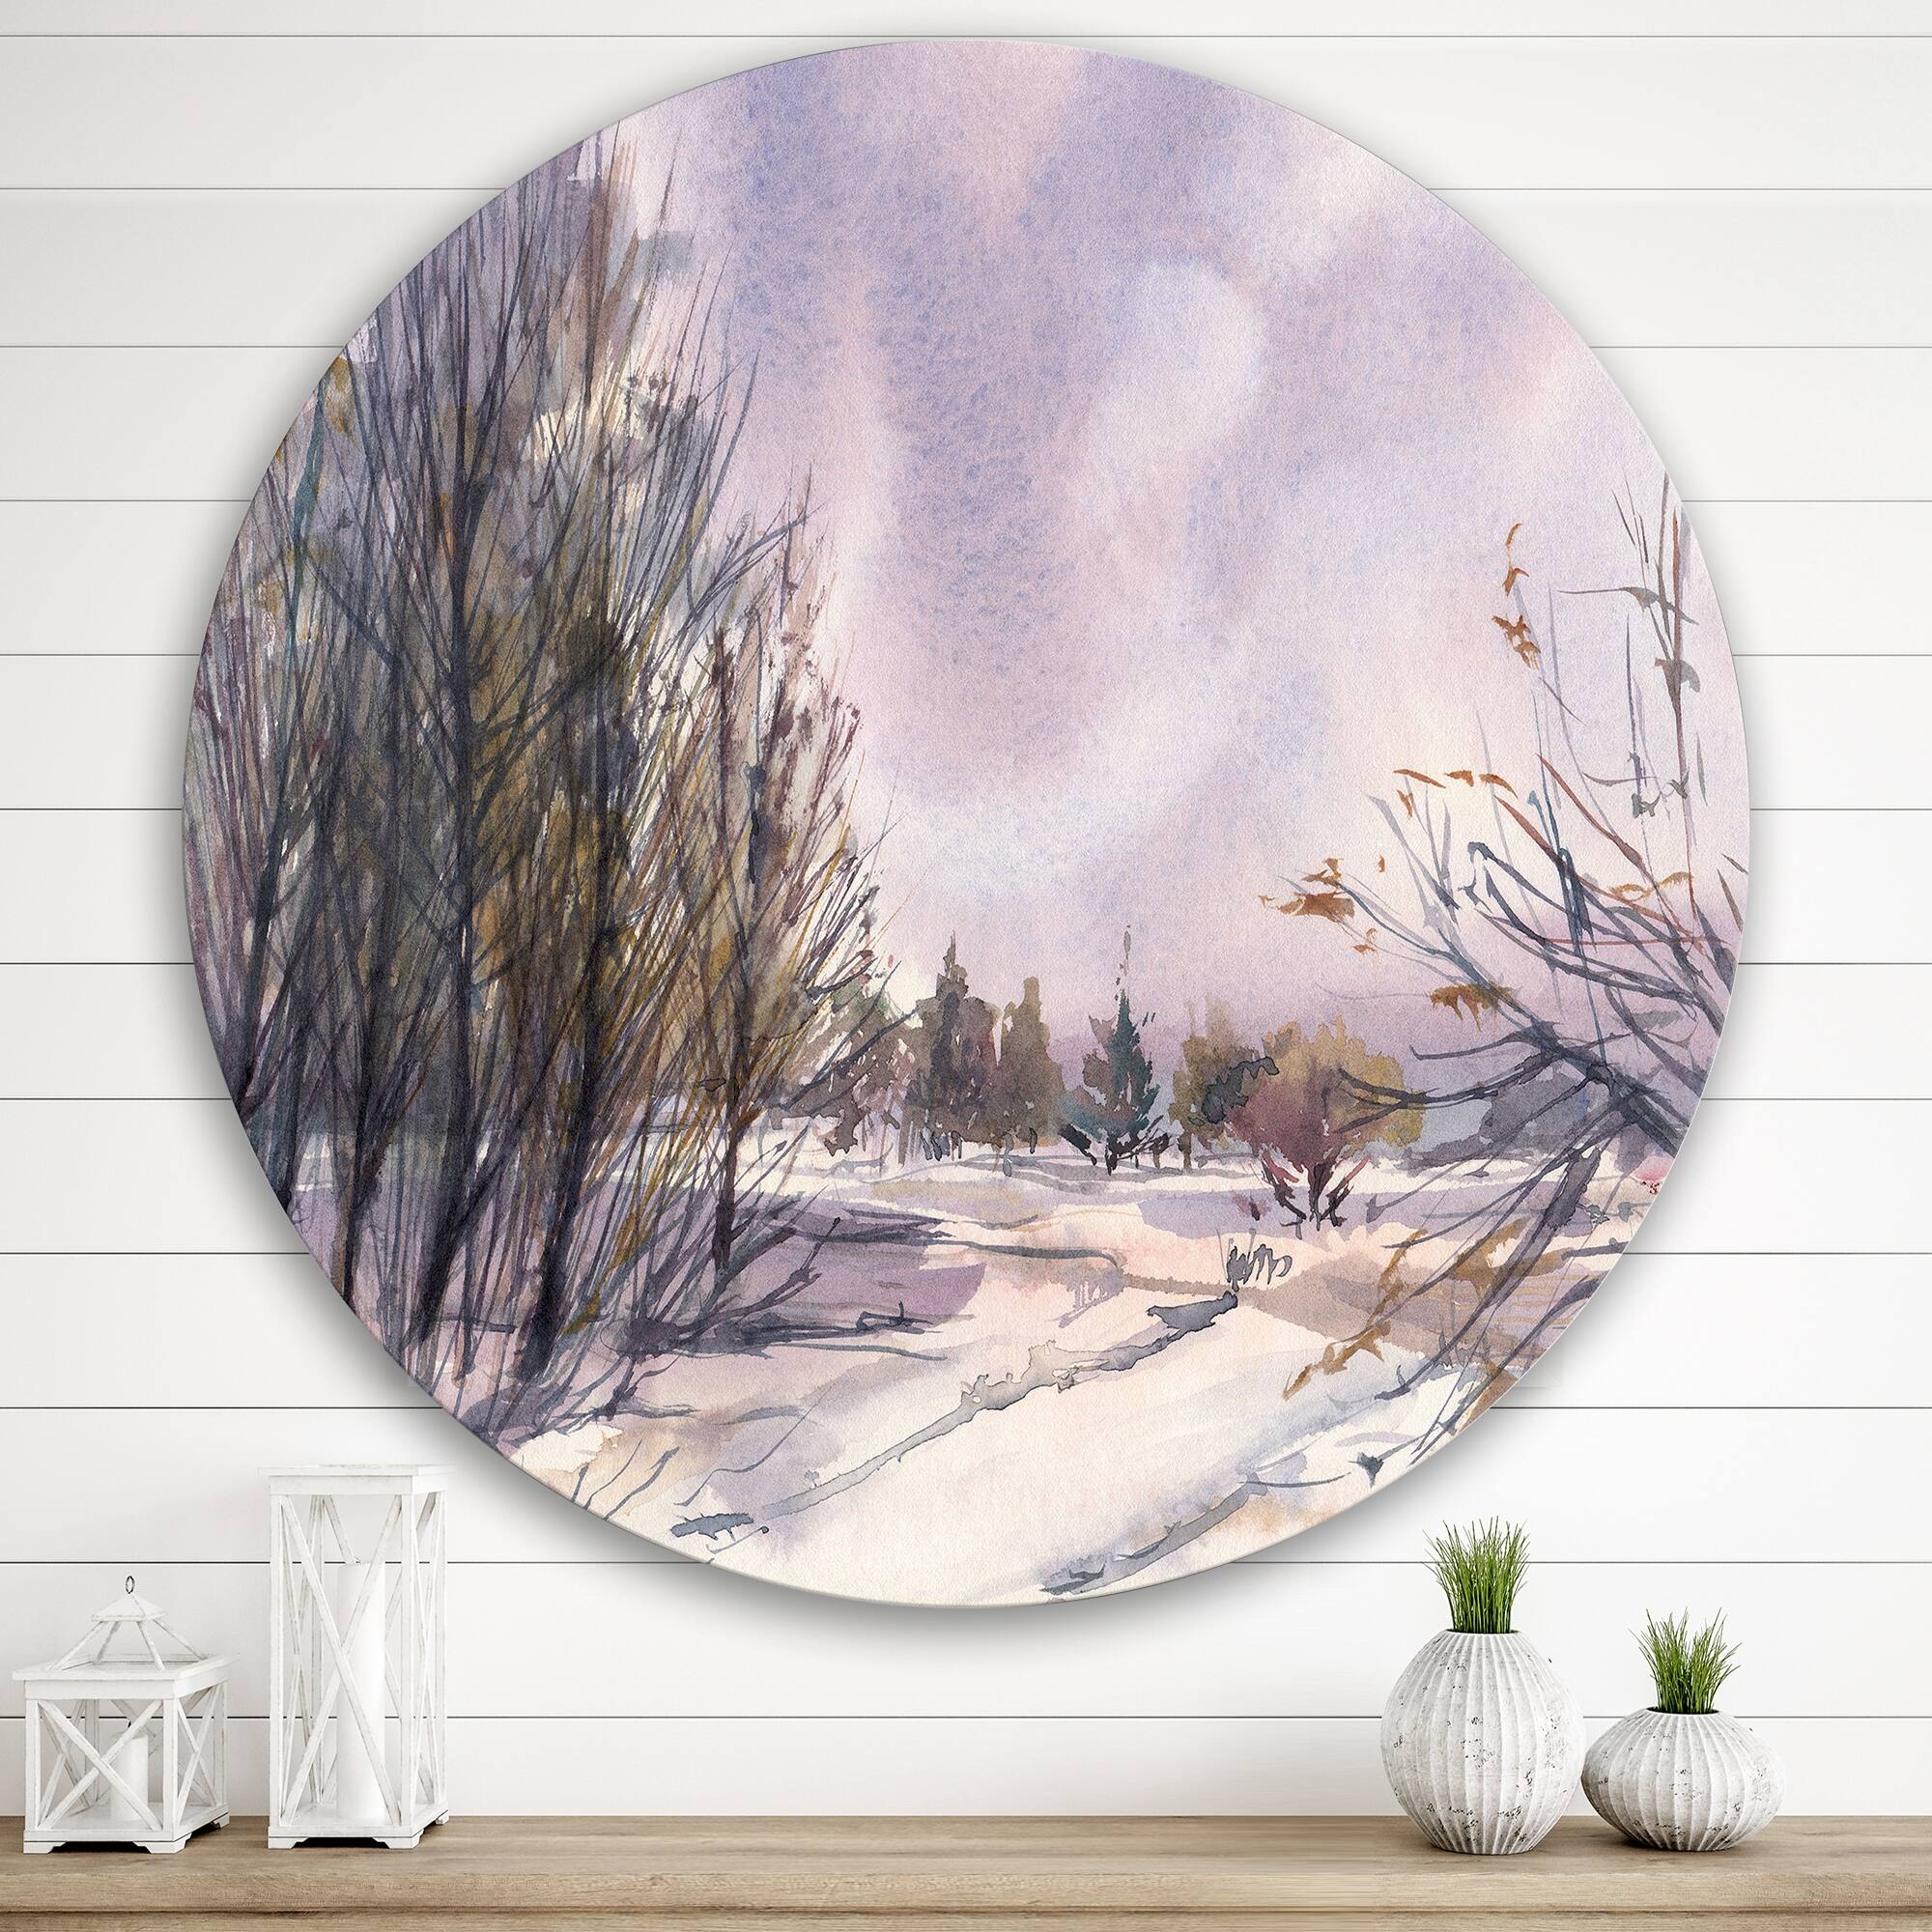 Designart 'Winter Landscape With Purple Snowy Tones' Traditional Metal Circle Wall Art